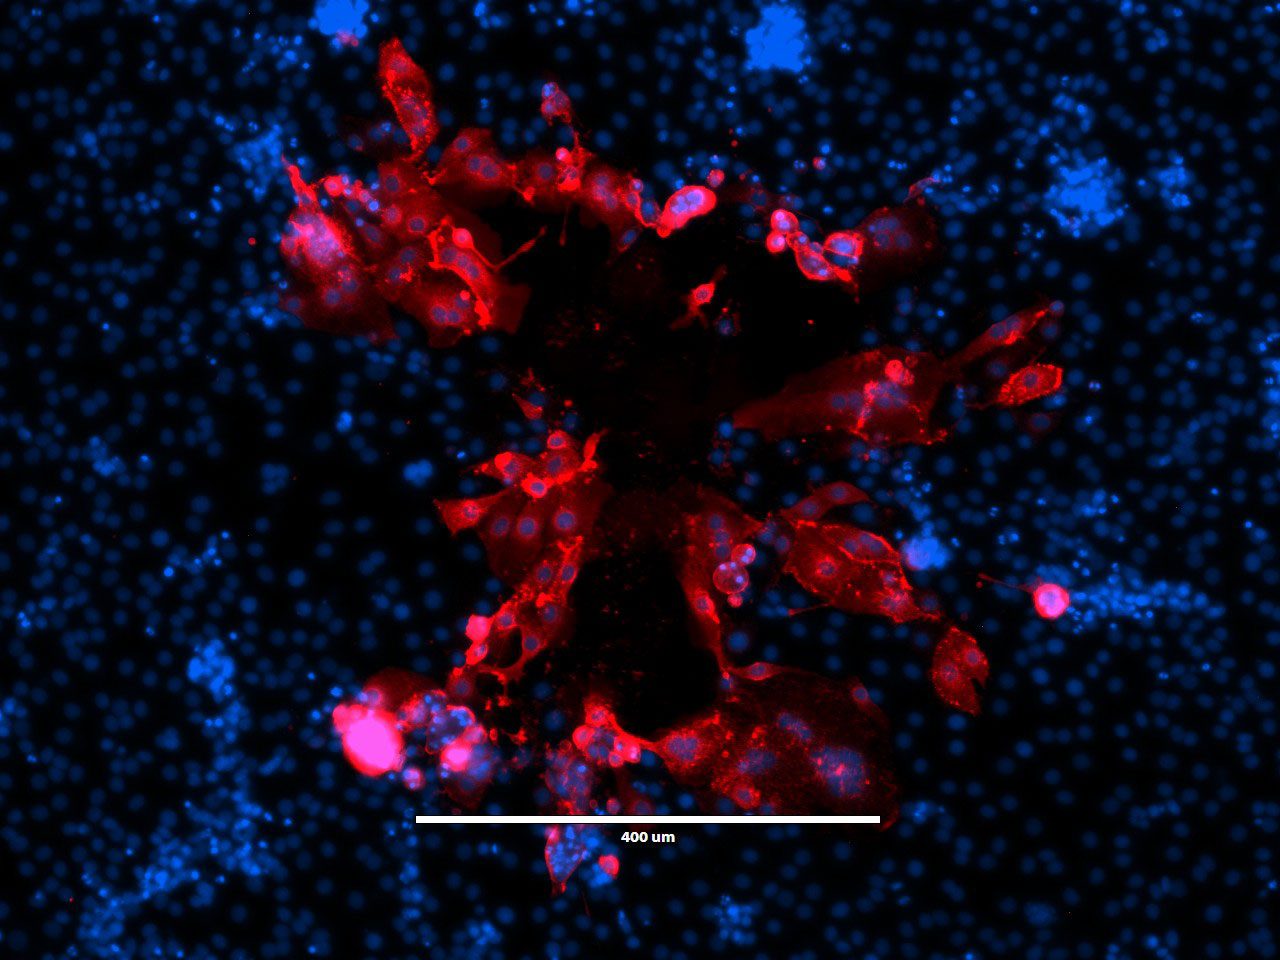 “Beauty Is Infectious.” Immunofluorescence image of a virus plaque formed by human metapneumovirus (HMPV) in LLC-MK2 cells. HMPV (red) and nucleus (DAPI, blue). Image courtesy of Jiuyang Xu (visting scholar, Tsinghua University School of Medicine) and John V. Williams, Department of Pediatrics, University of Pittsburgh.